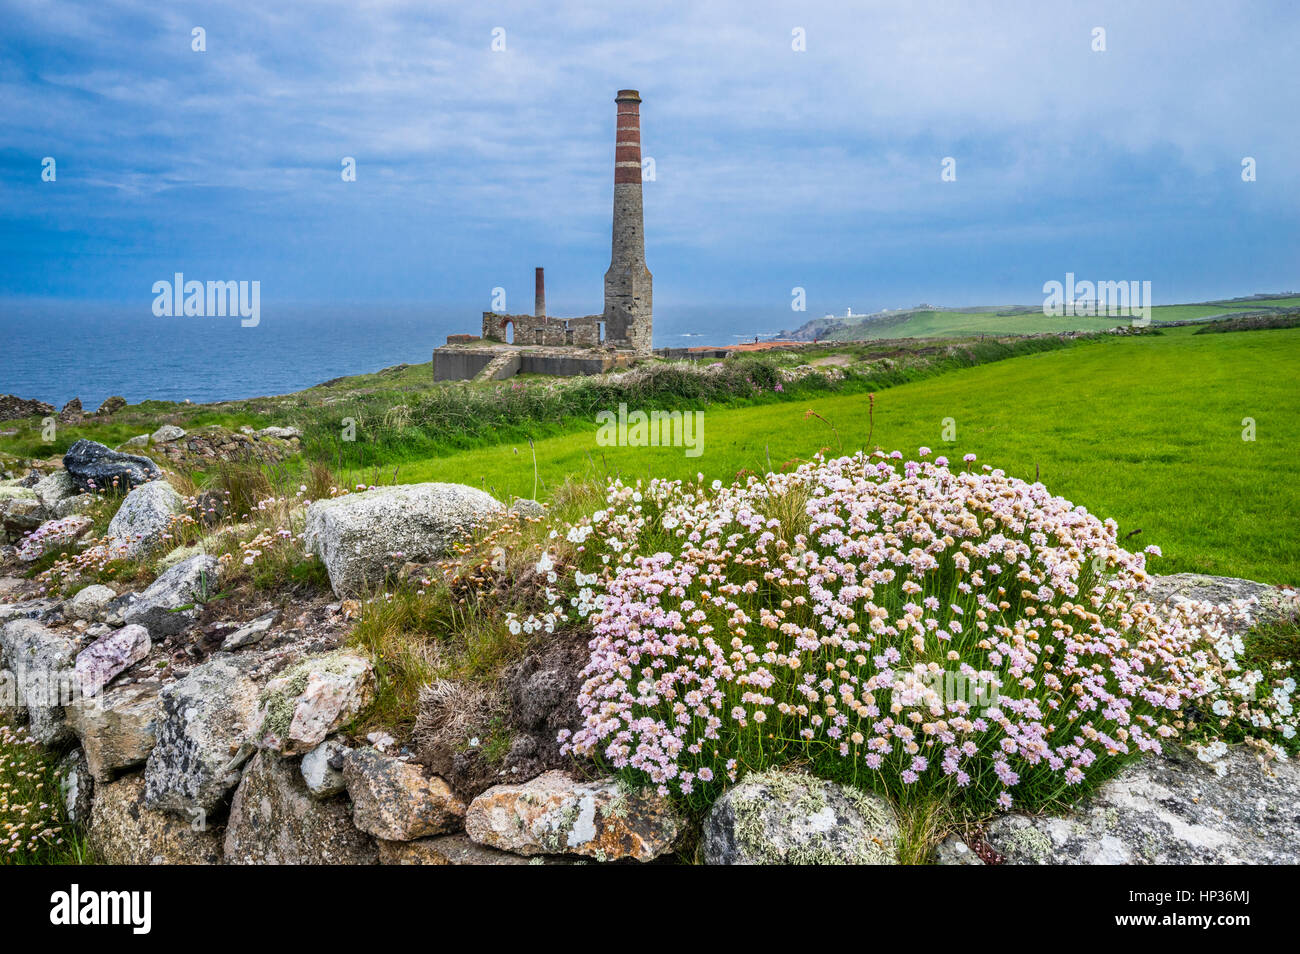 United Kingdom, South West England, Cornwall, Tin Coast, Levant Mine, the stack with its decorative banded brickwork, served the boilers of the steam  Stock Photo